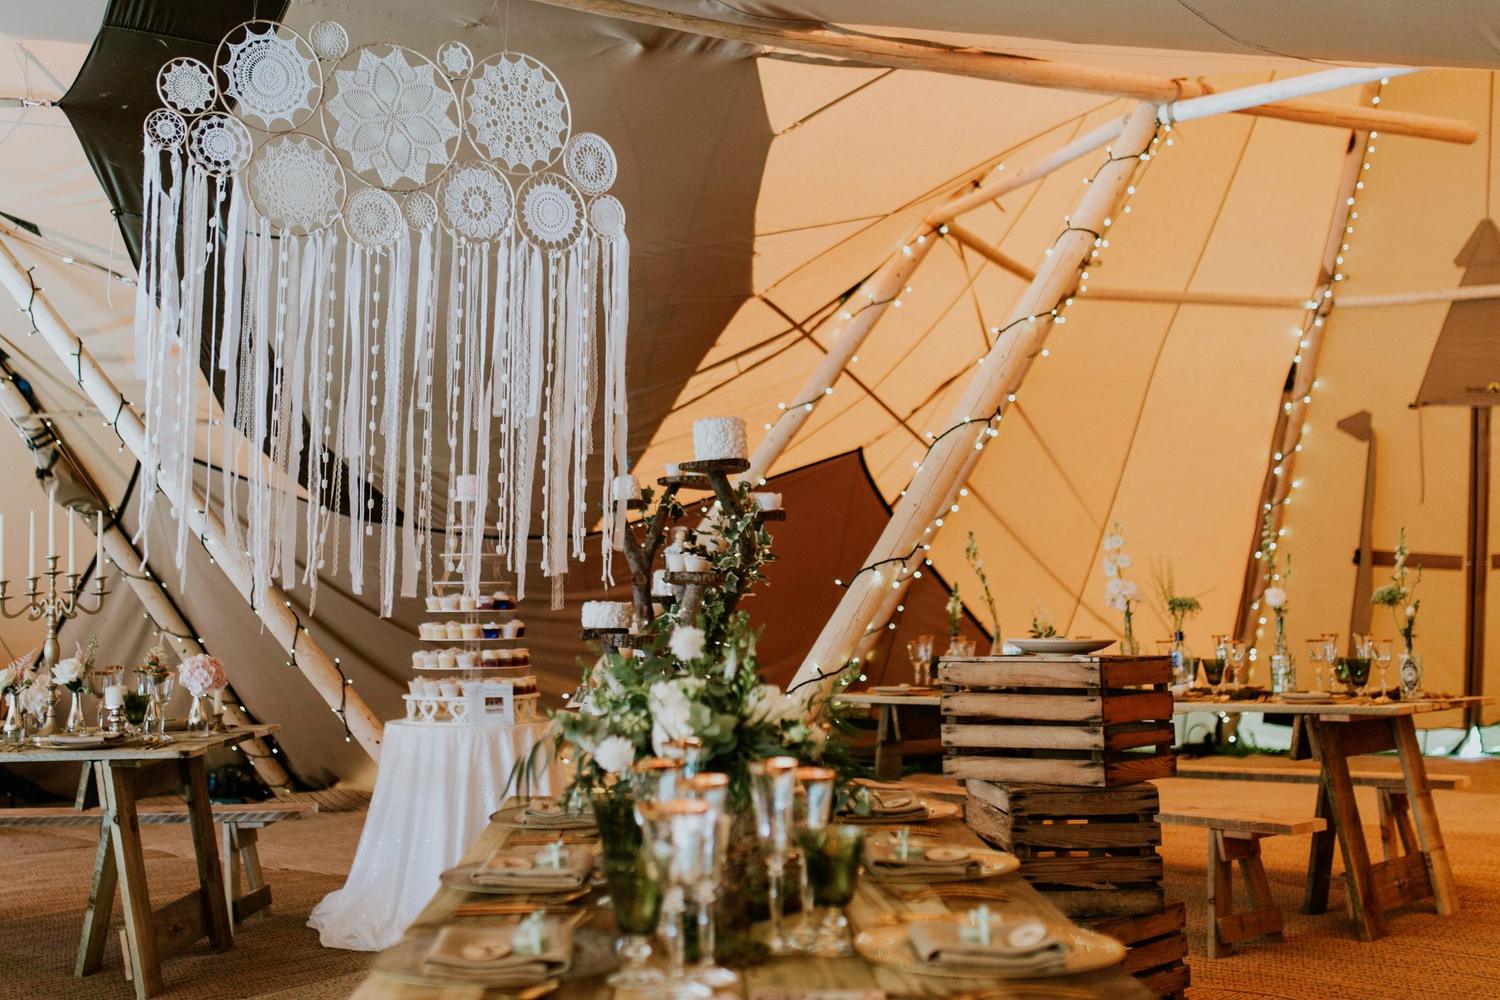 A rustic and stylish wedding setting, in a teepee, with wooden beams, a large dream catcher, glass and wooden place settings on a long oak bench. Apple crates, fairy lights and greenery in the background.